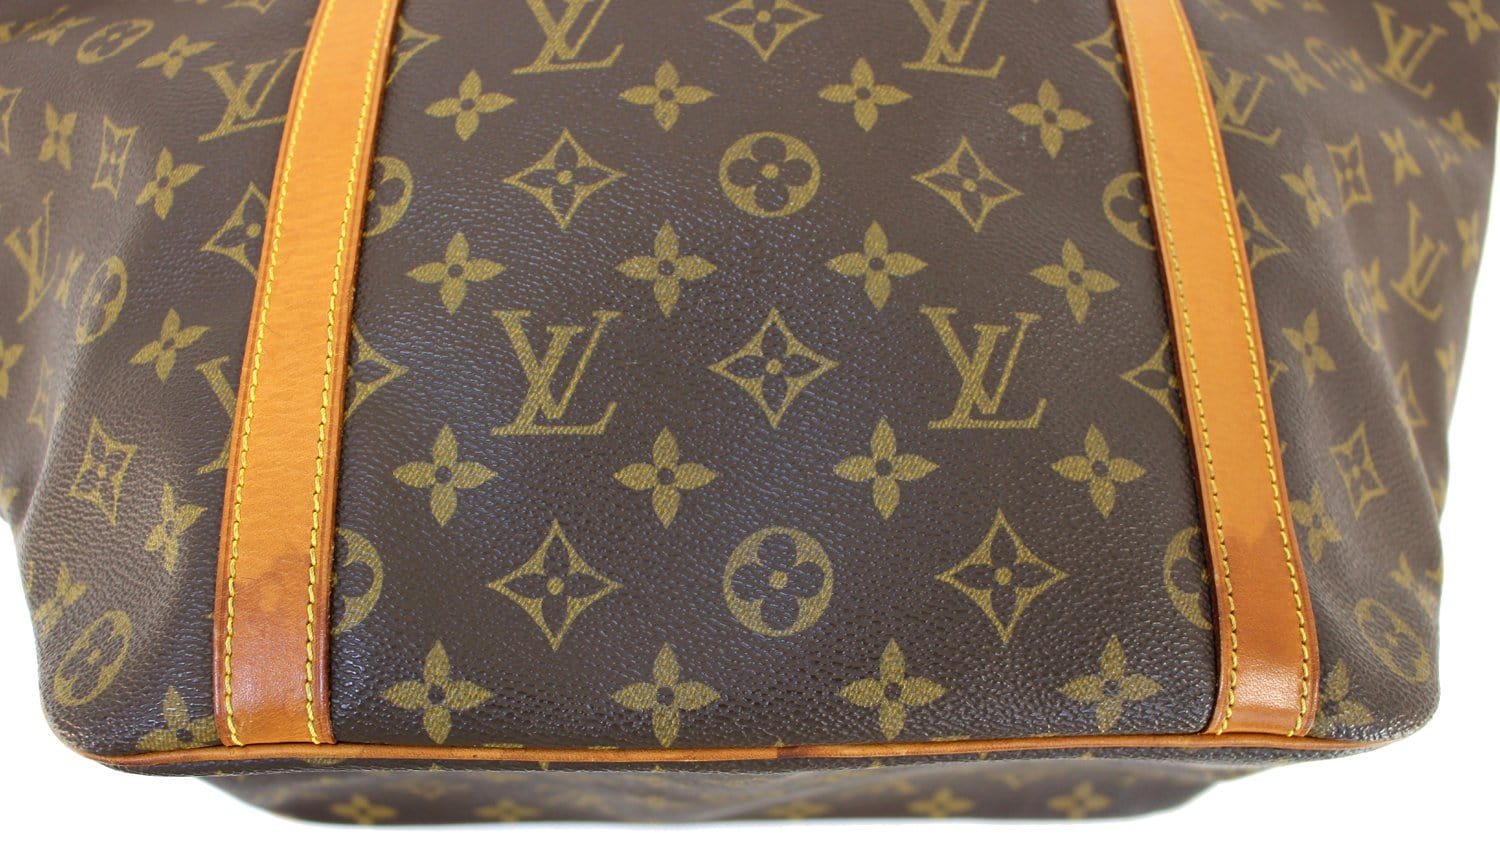 Louis Vuitton Sac Shopping - 11 For Sale on 1stDibs  louis vuitton sac  shopper, louis vuitton sac shopping tote, lv sac shopping tote